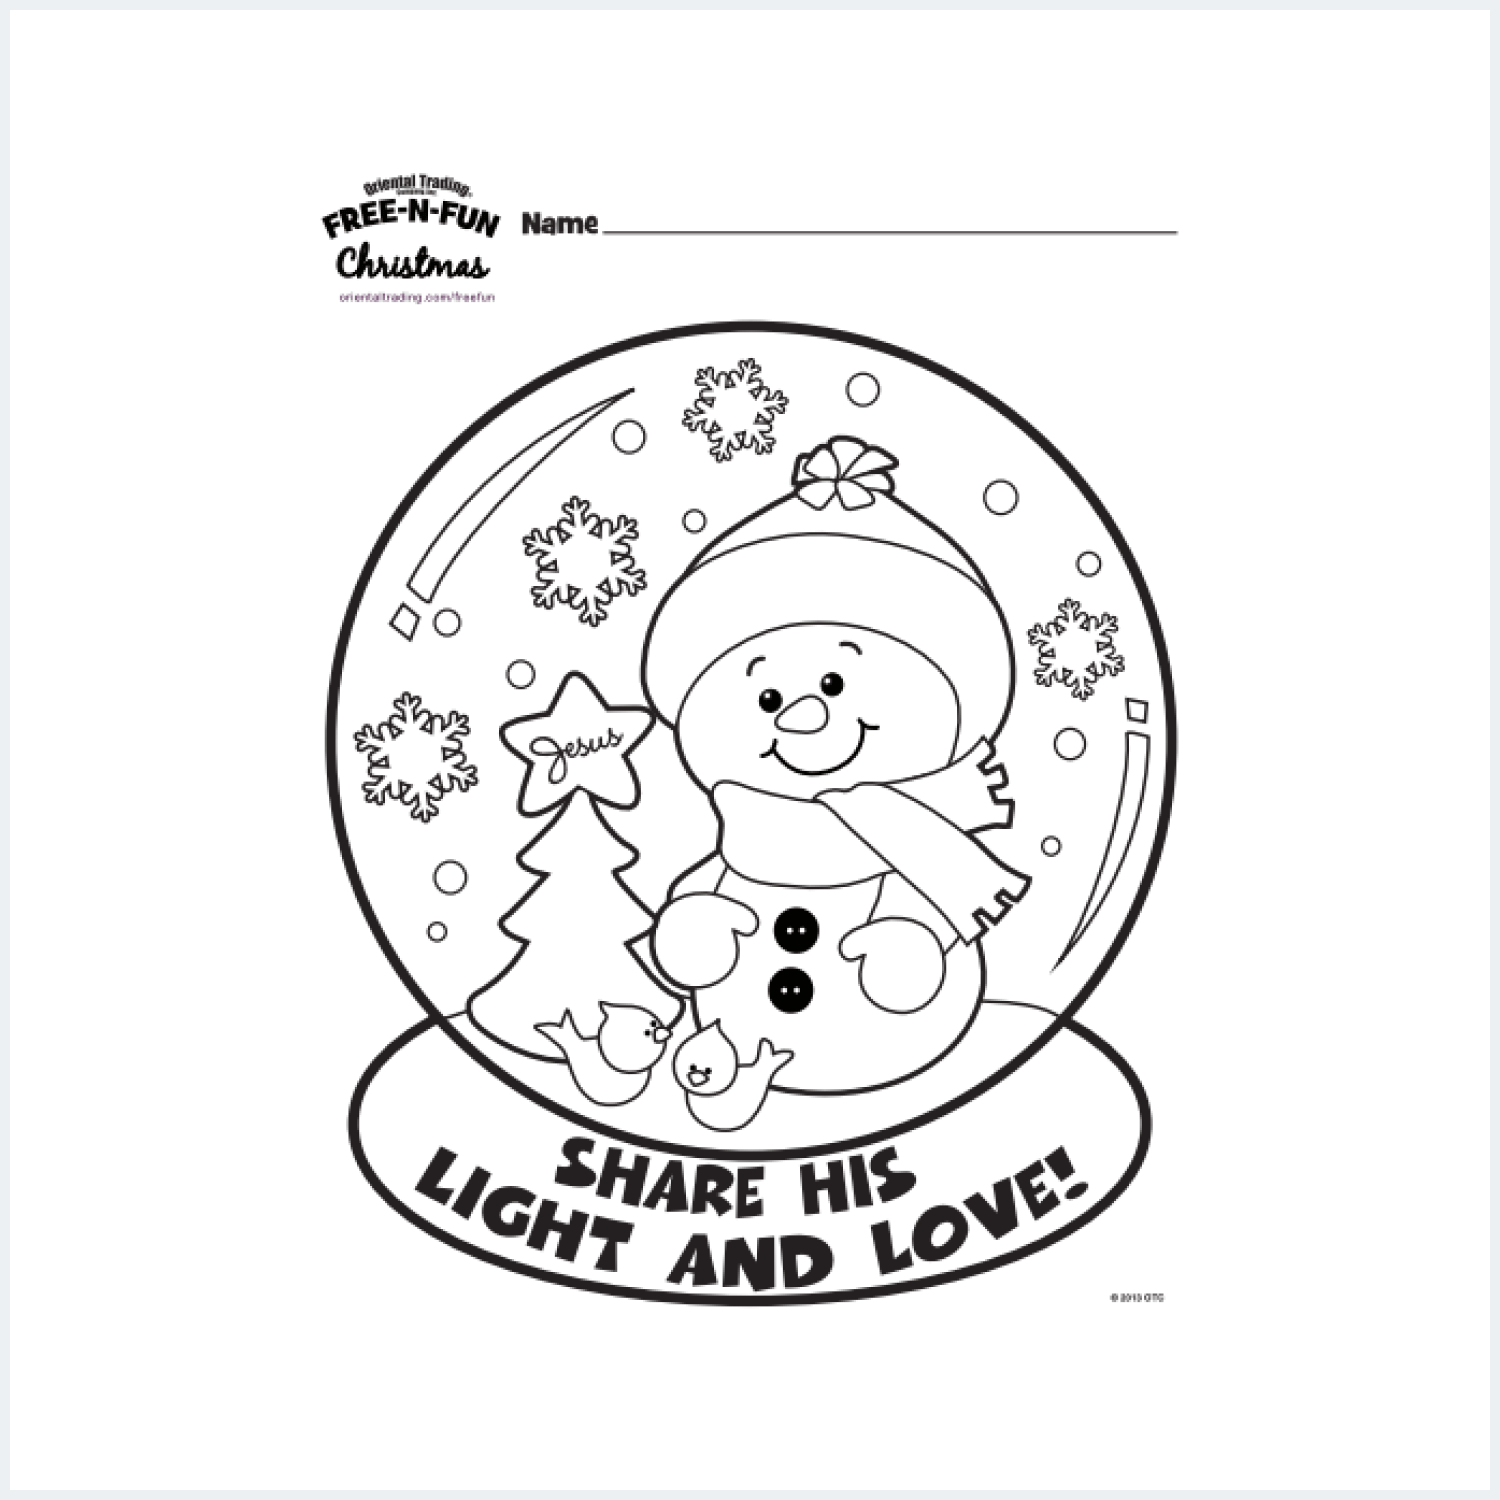 Snow globe coloring page cover image.